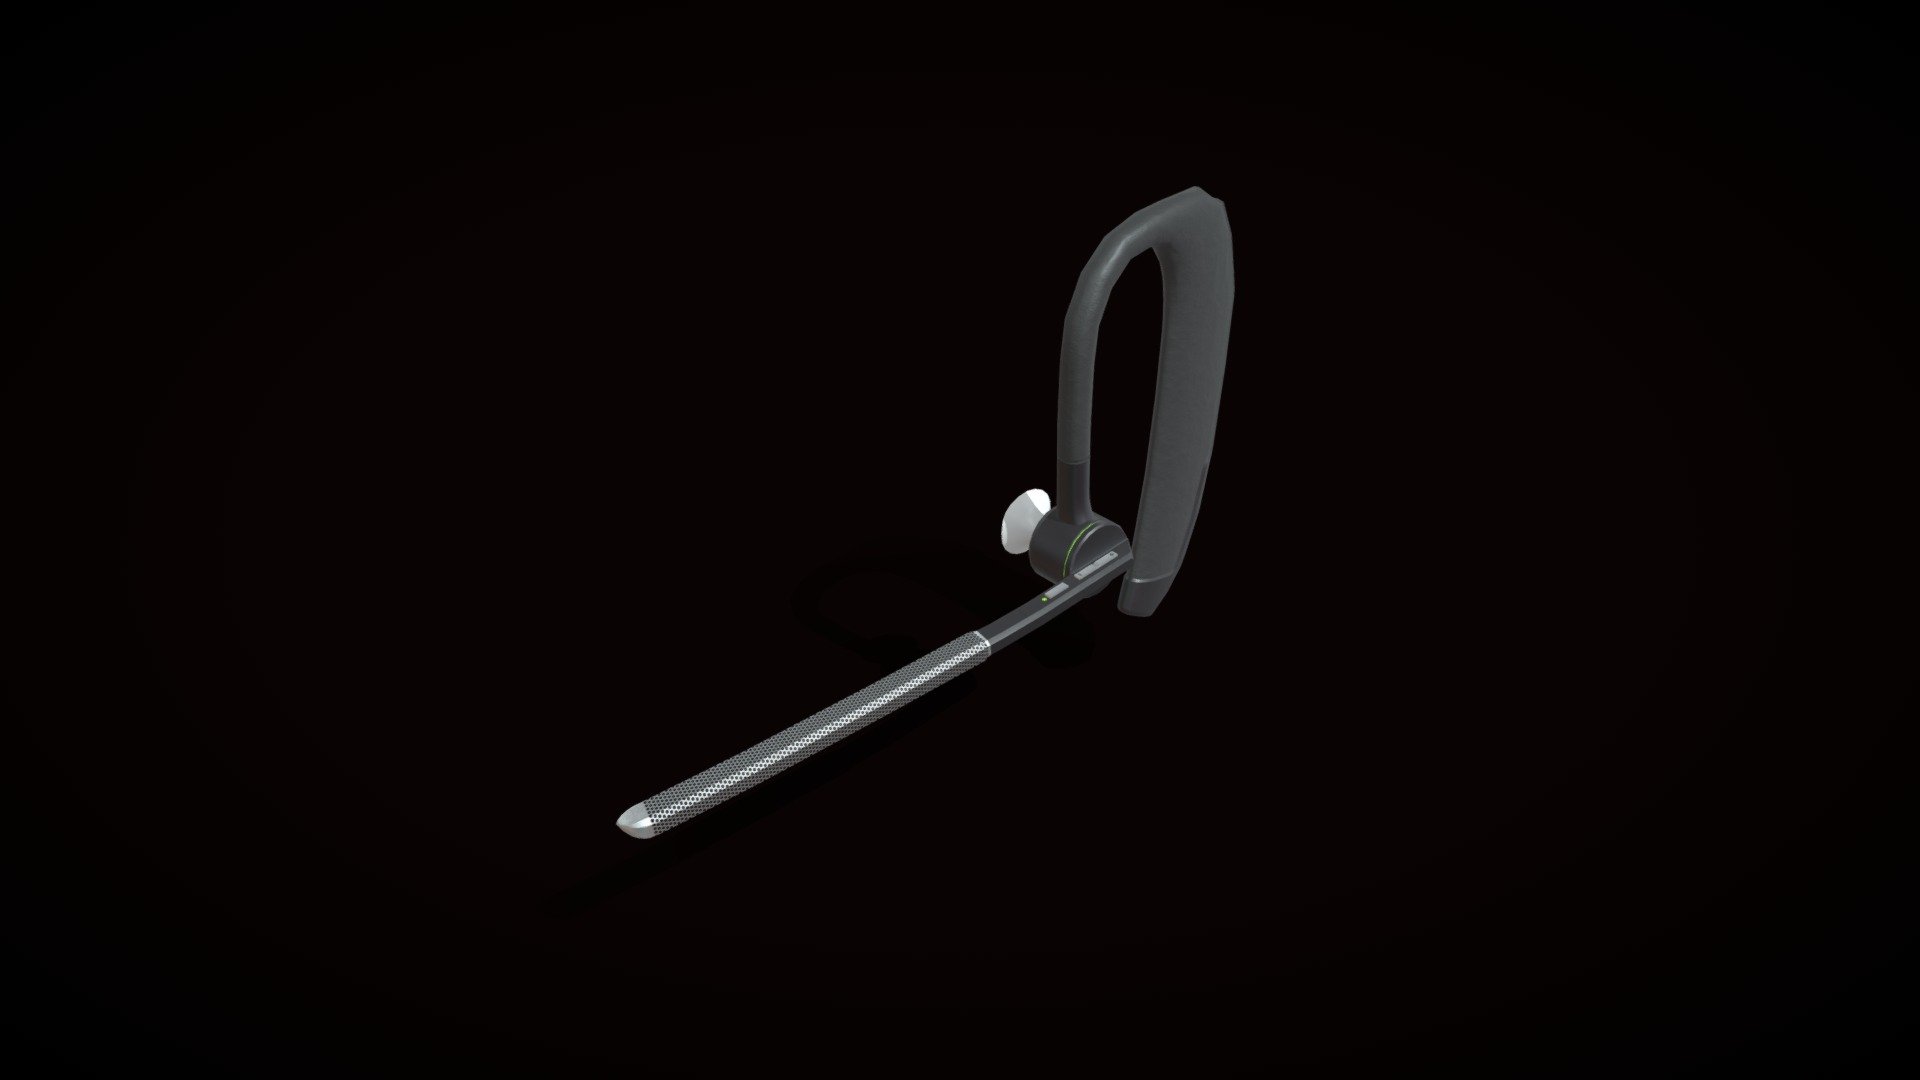 A bluetooth headset based mostly on one i regularly use. Pretty simple, but with enough little elements to get some good use out of normal maps and textures 3d model